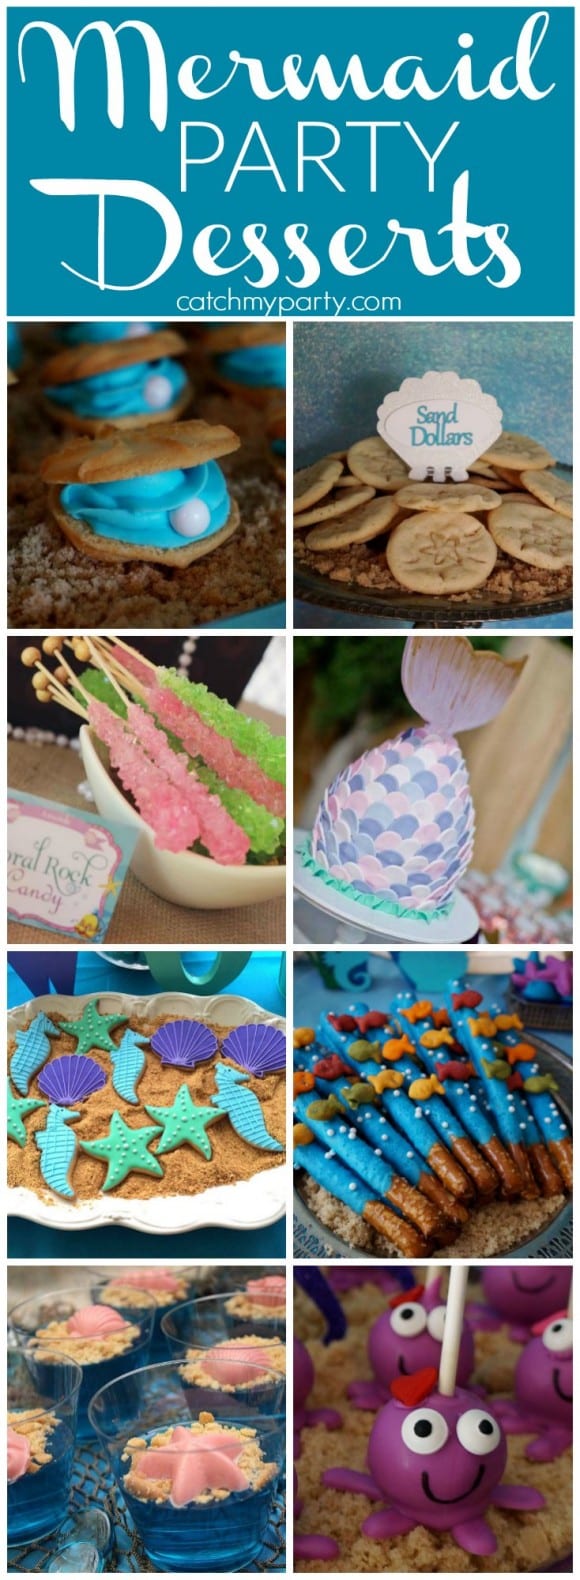 Mermaid Party Desserts to give you ideas for your mermaid and under the sea birthday parties! | CatchMyParty.com